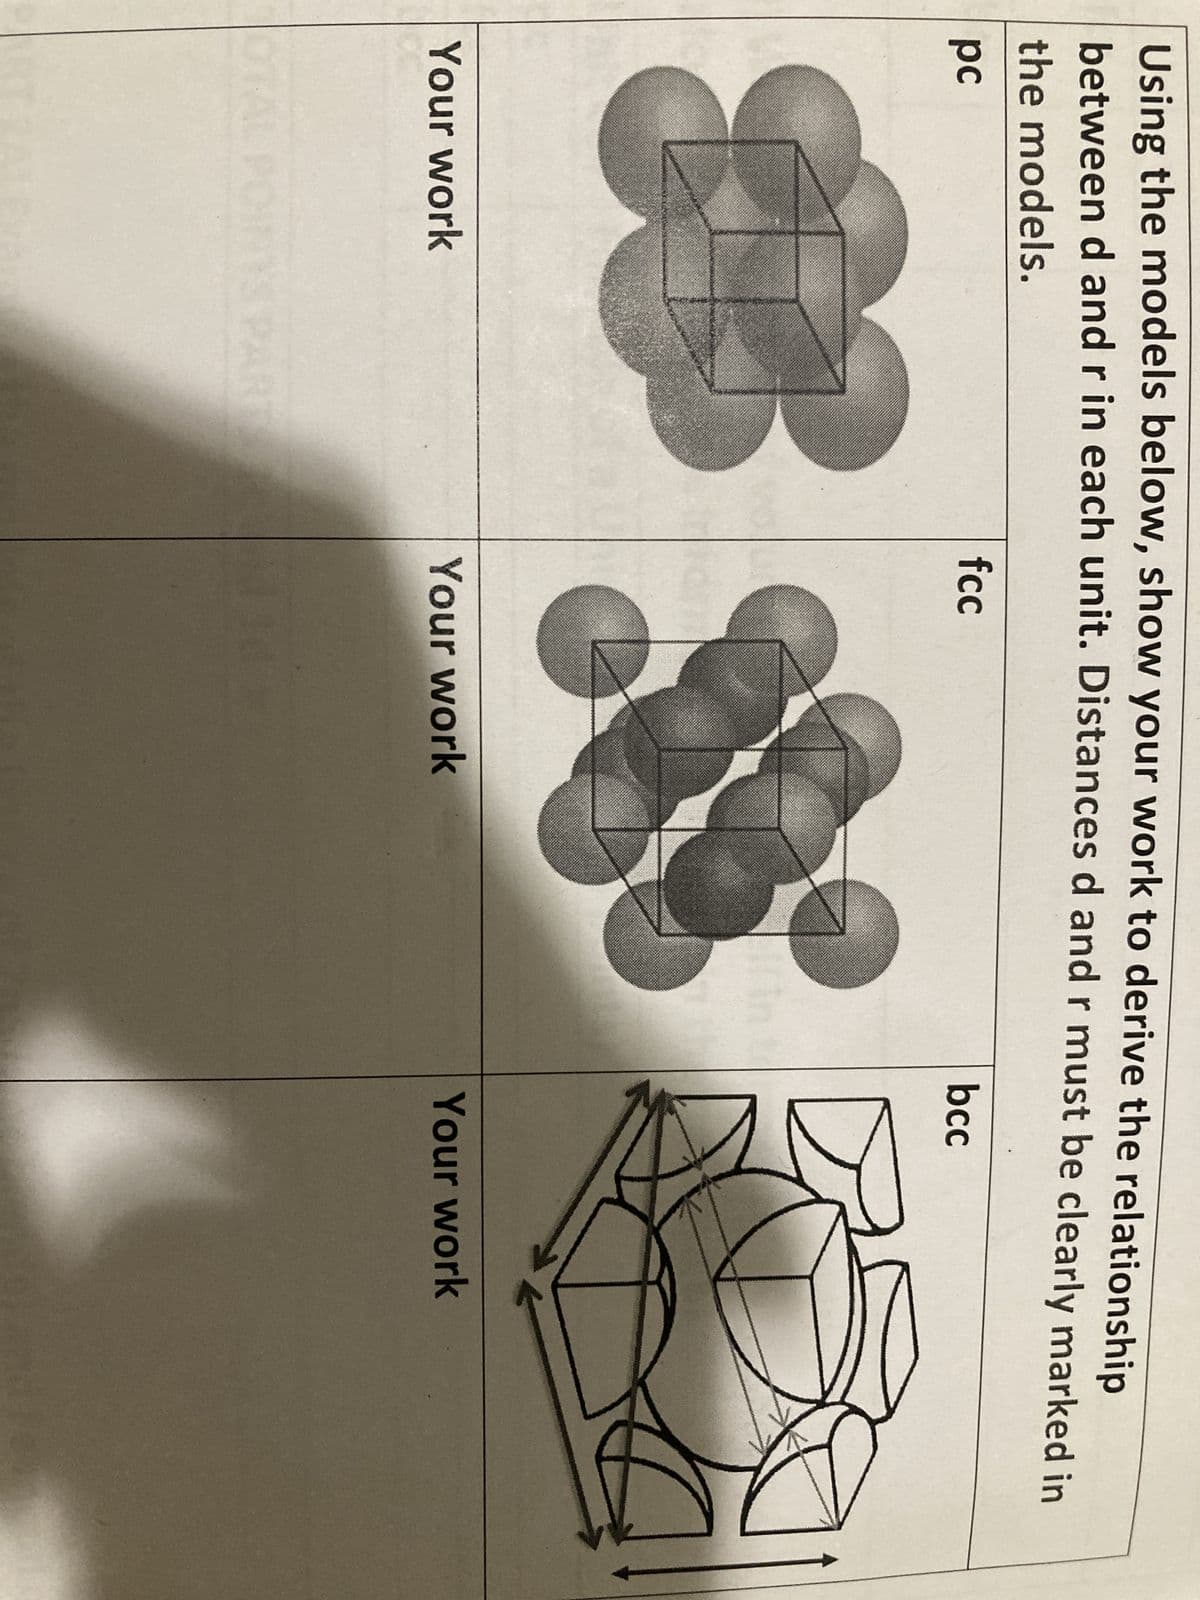 Using the models below, show your work to derive the relationship
between d and r in each unit. Distances d and r must be clearly marked in
the models.
pc
Your work
fcc
Your work
OTAL POINTS PARTM
bcc
Your work